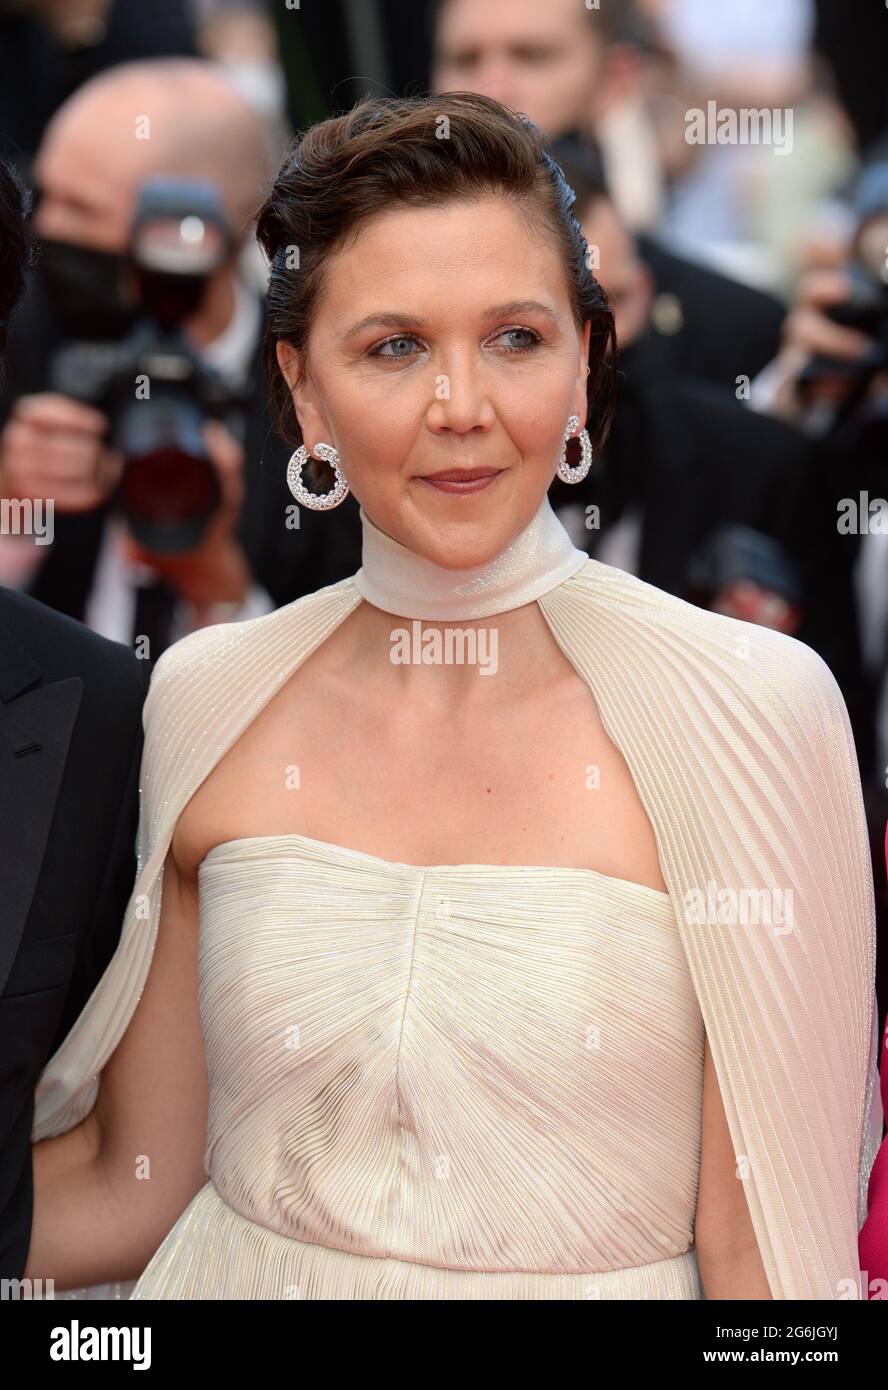 Cannes, France, 6 July 2021 Maggie Gyllenhaal at the premiere for Annette, held at the Palais des Festival. Part of the 74th Cannes Film Festival. Credit: Doug Peters/EMPICS/Alamy Live News Stock Photo